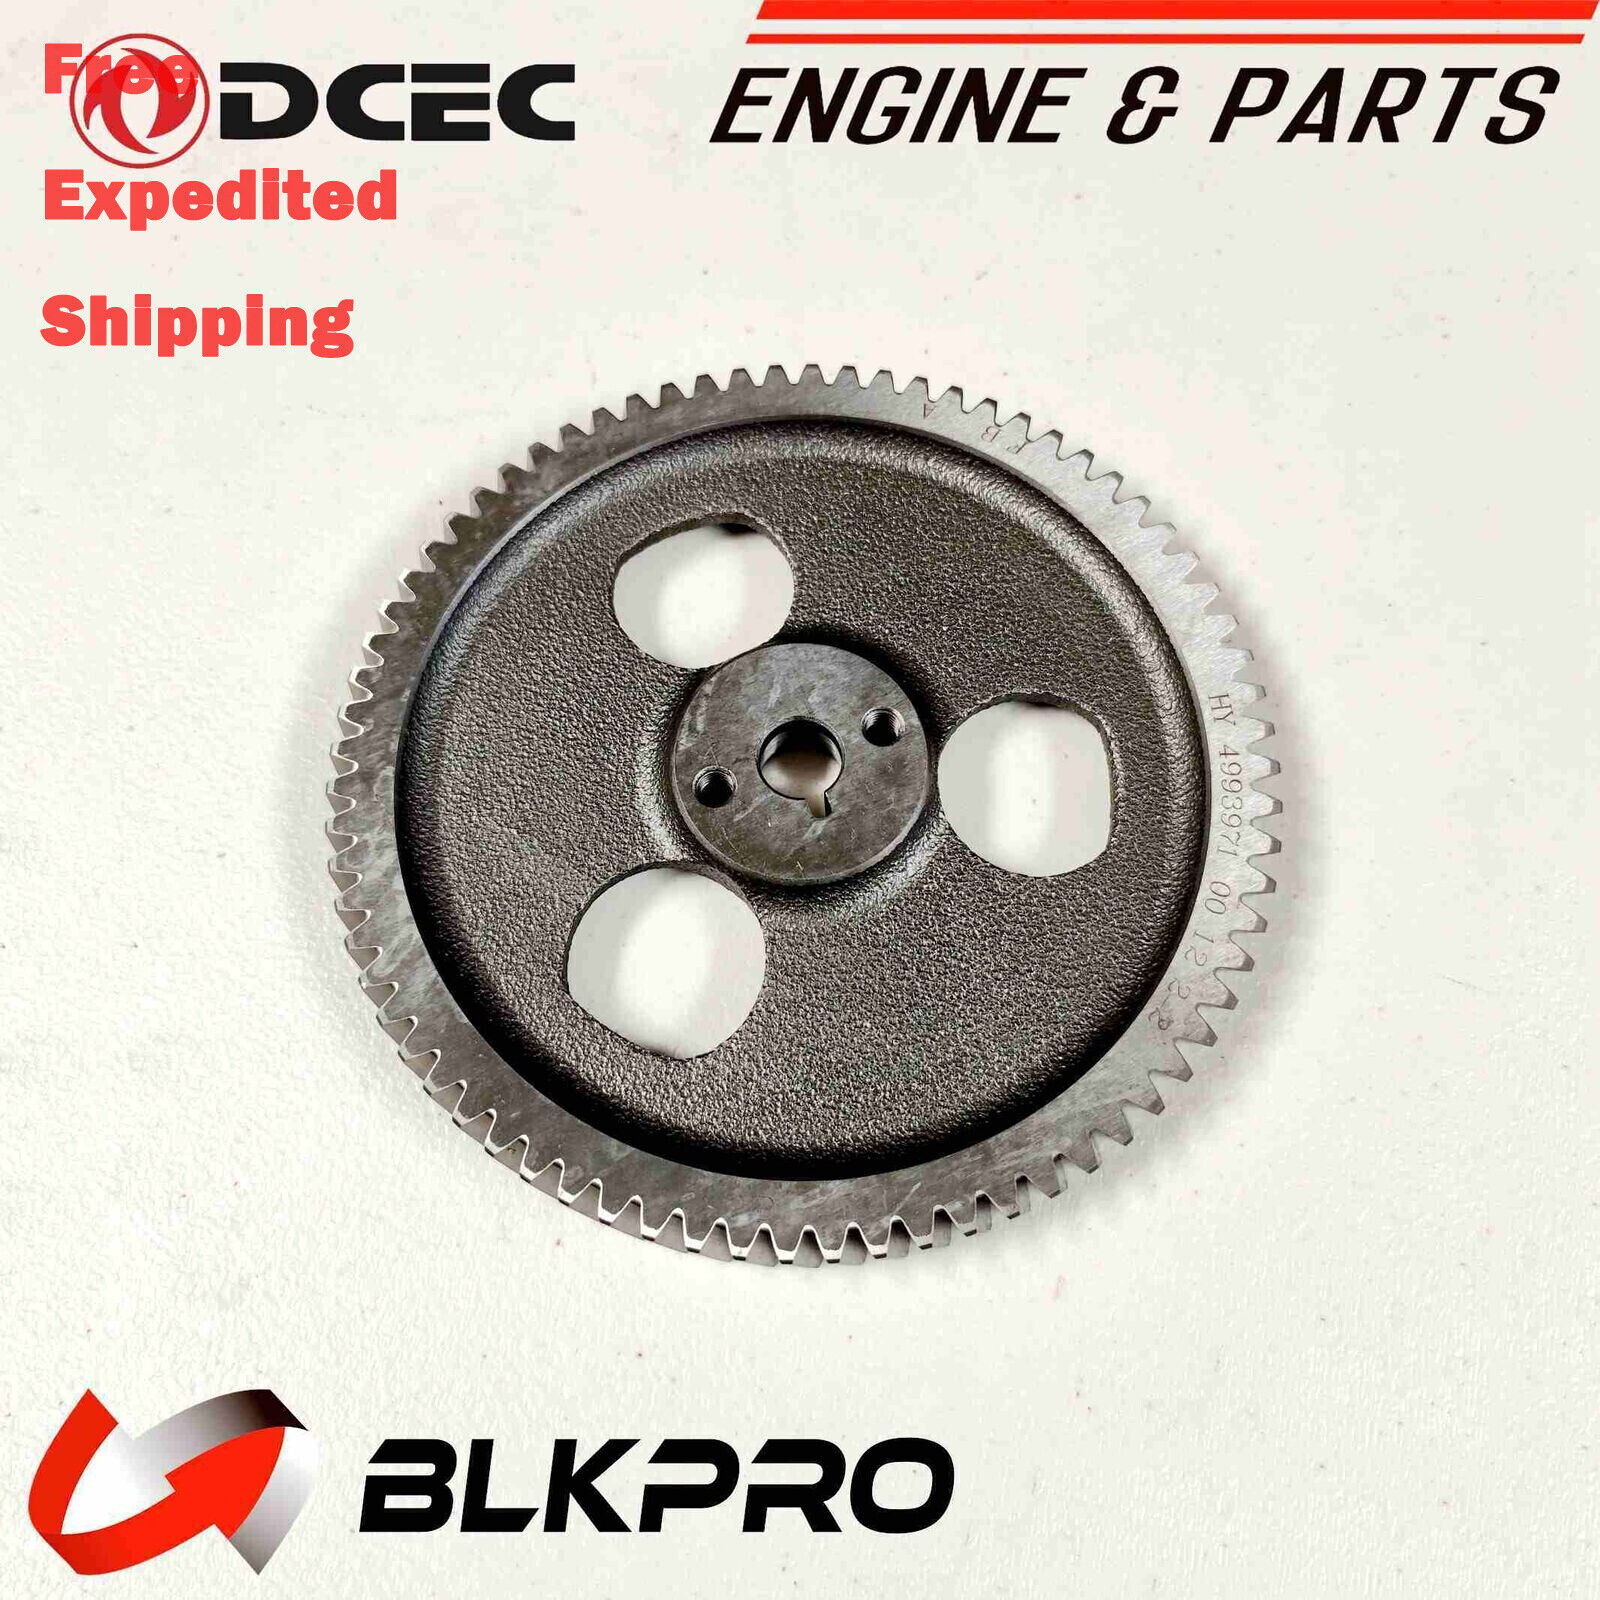 Timing GEAR For FUEL Injection PUMP Bosch Rotary Dodge 5.9L Cummins B3.9 89-93